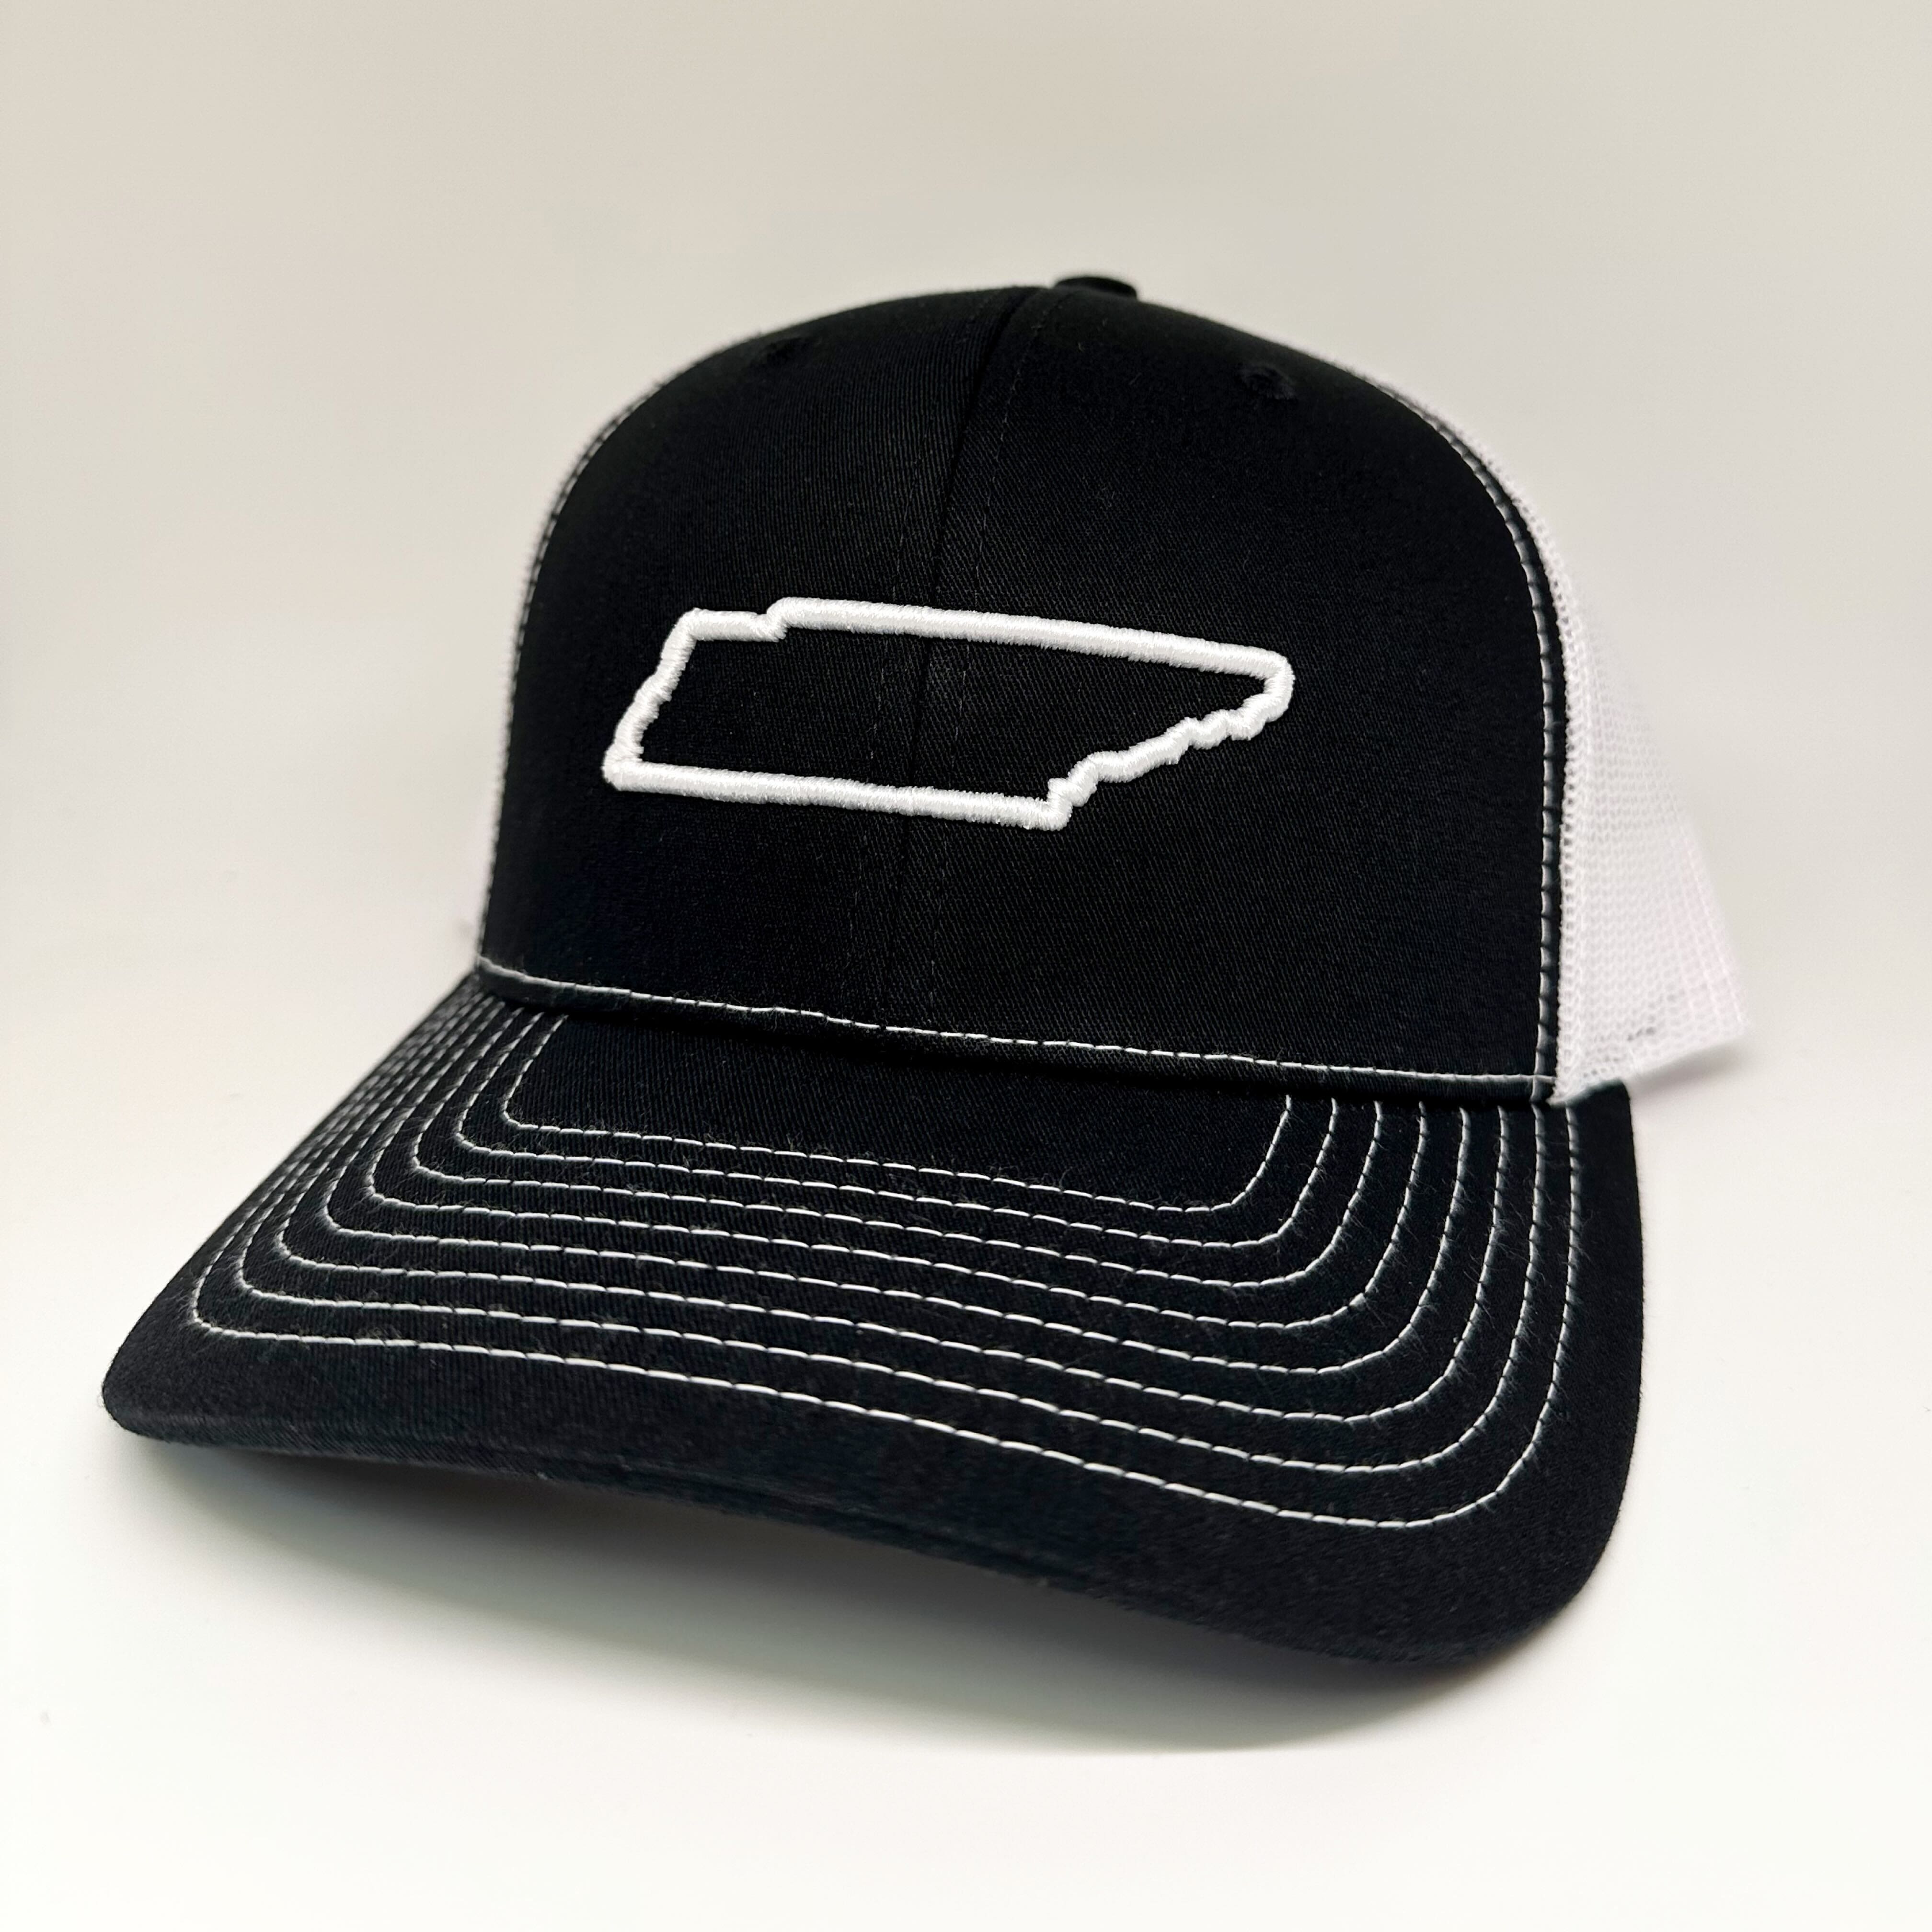 Thumbnail for Tennessee Embroidery Hat - Greater Half